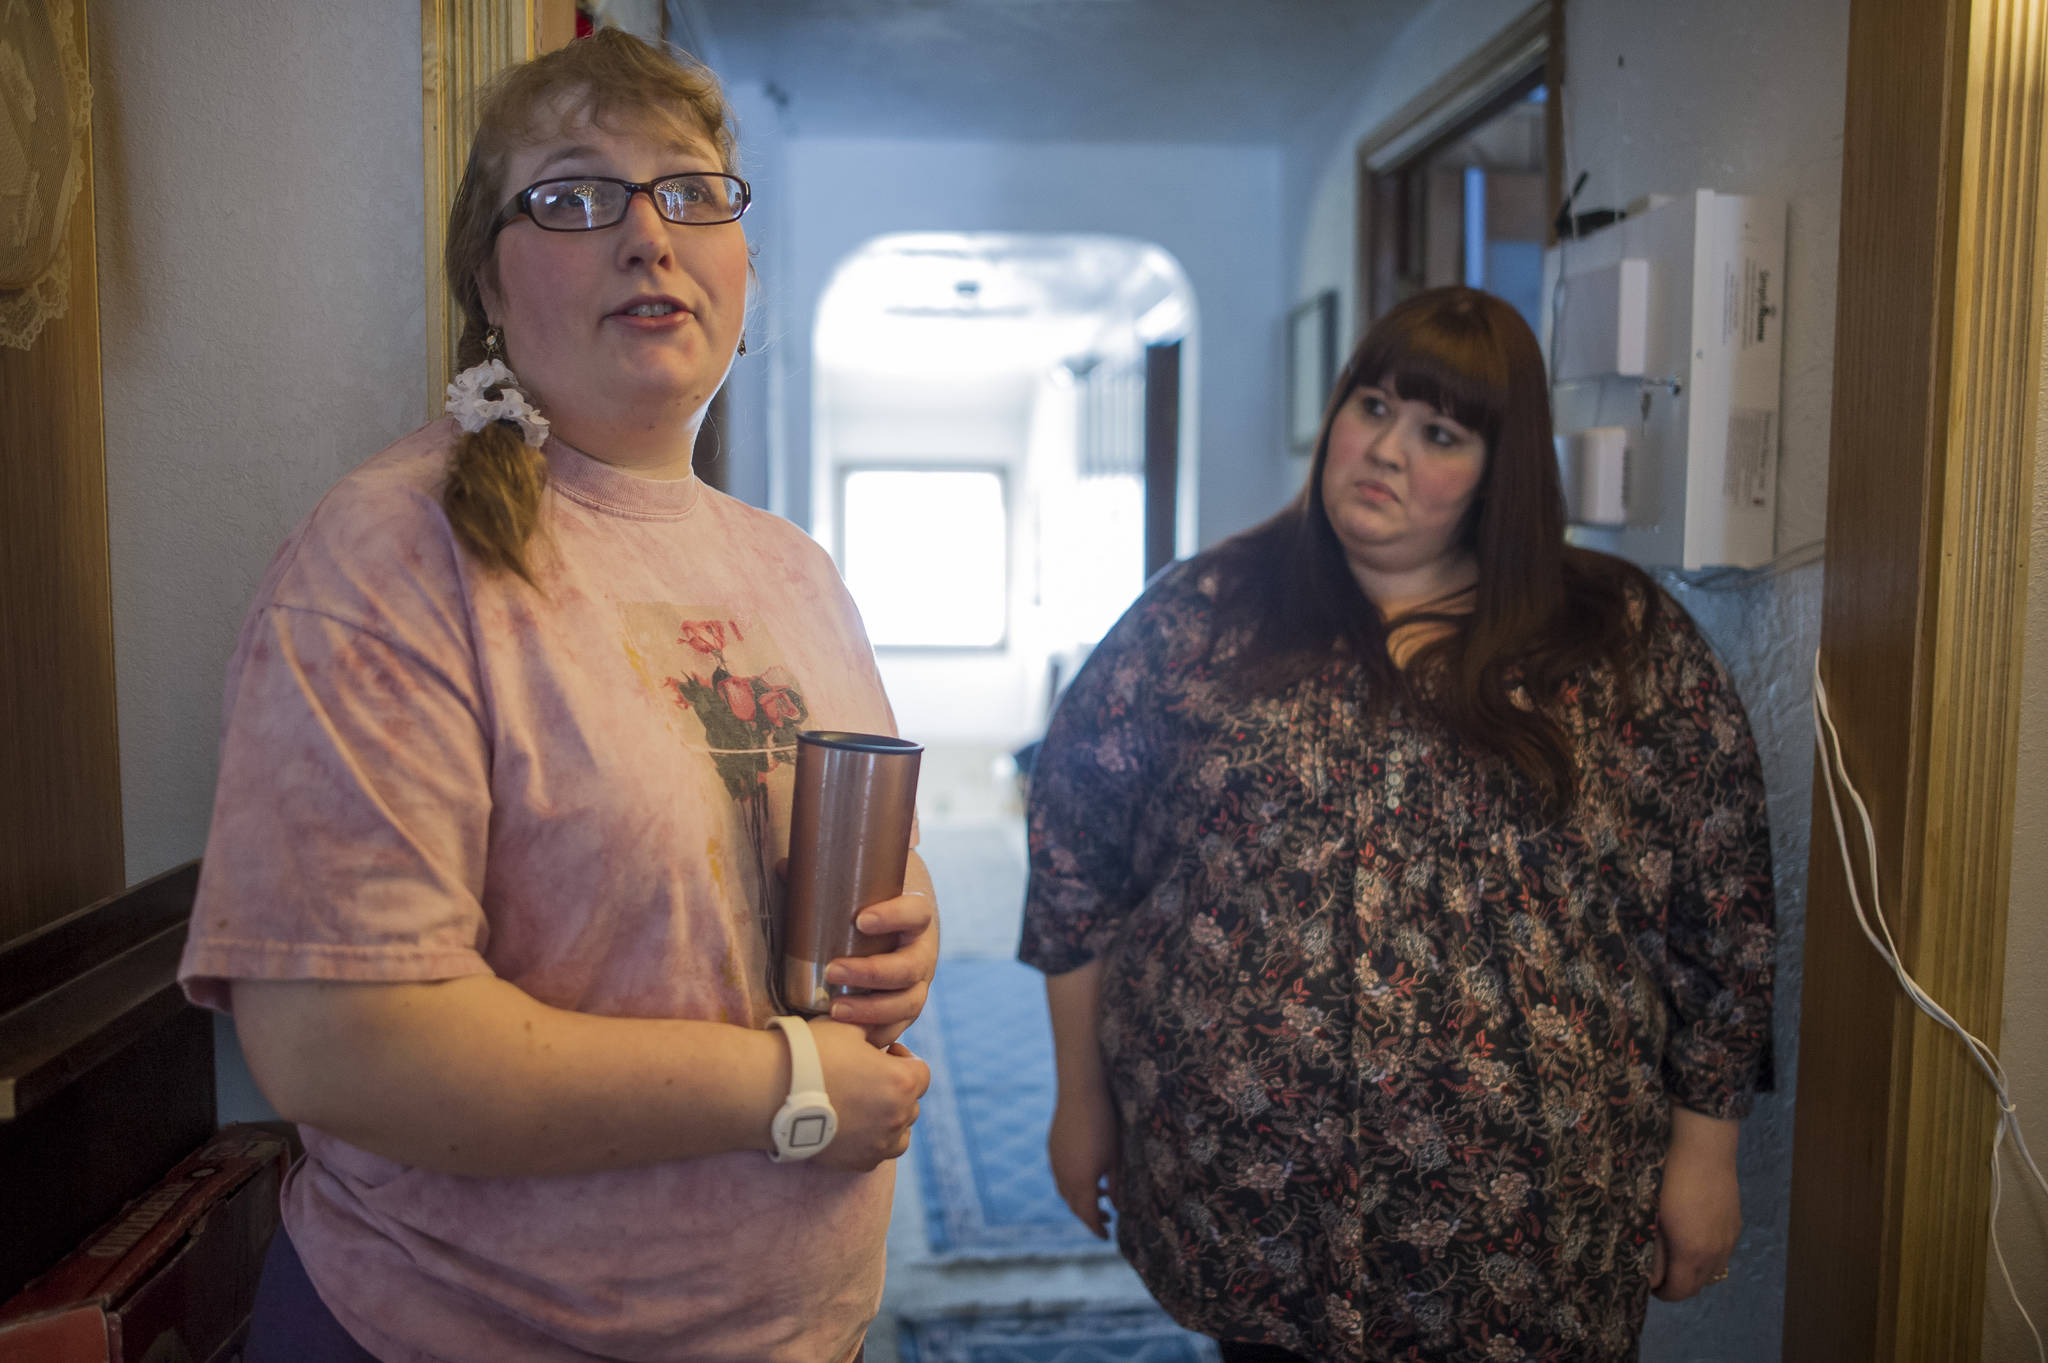 Gina Frickey, left, and Sabrina Cardinal, a service coordinator for REACH, talk about new assistive technology being used in Frickey’s home to help her stay safe. (Michael Penn | Juneau Empire)